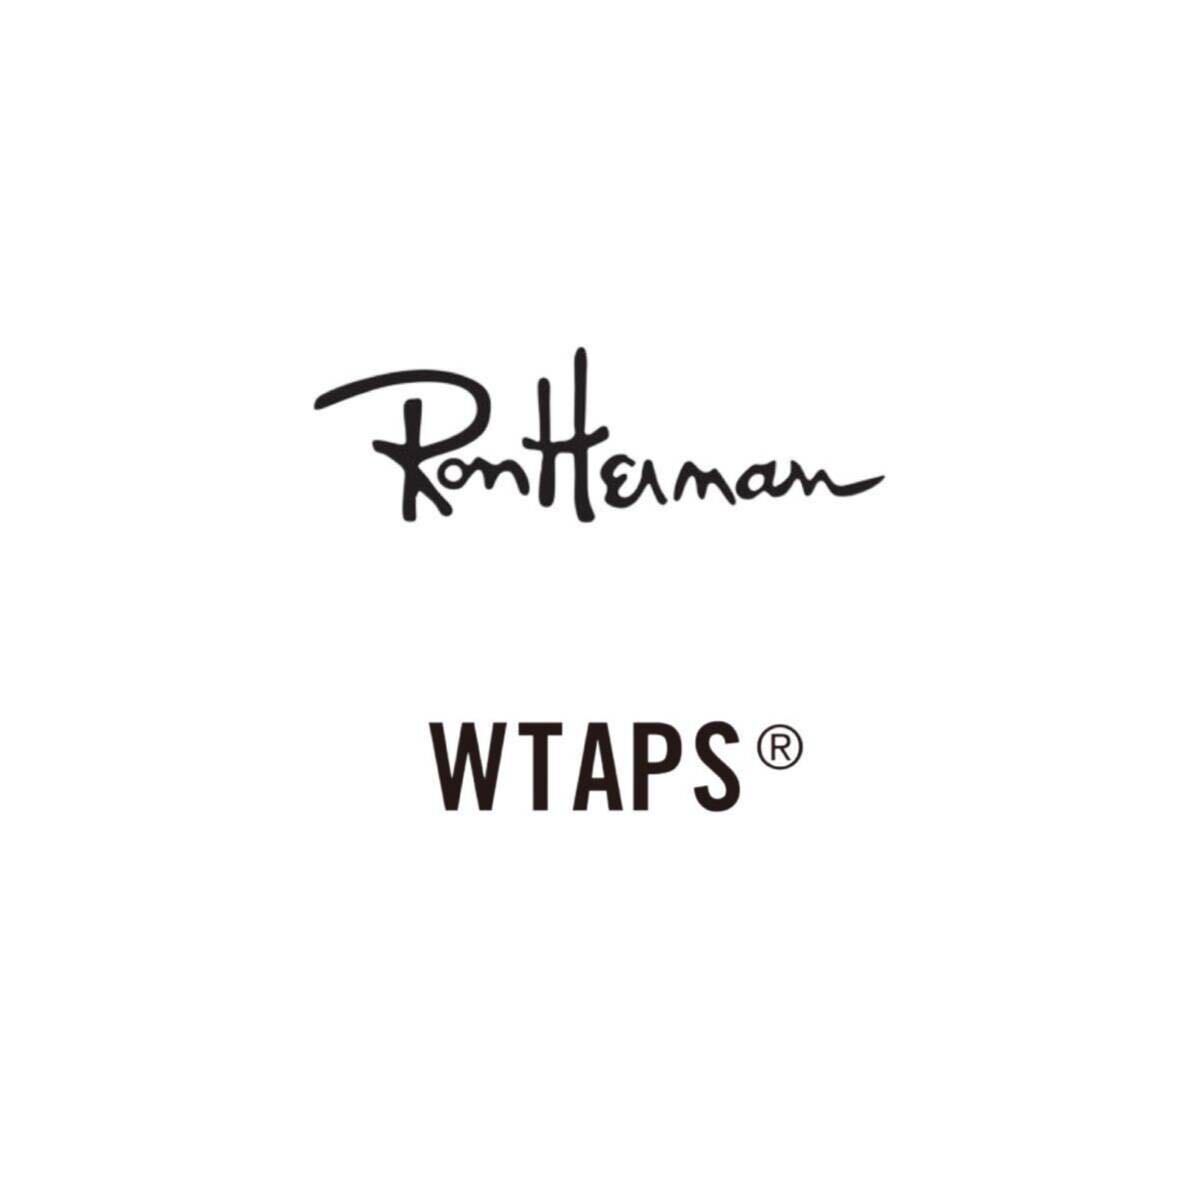 WTAPS Exclusive For Ronherman BLANK SS TEE 02 オリーブ ロンハーマン Tシャツ RHC レア_画像7